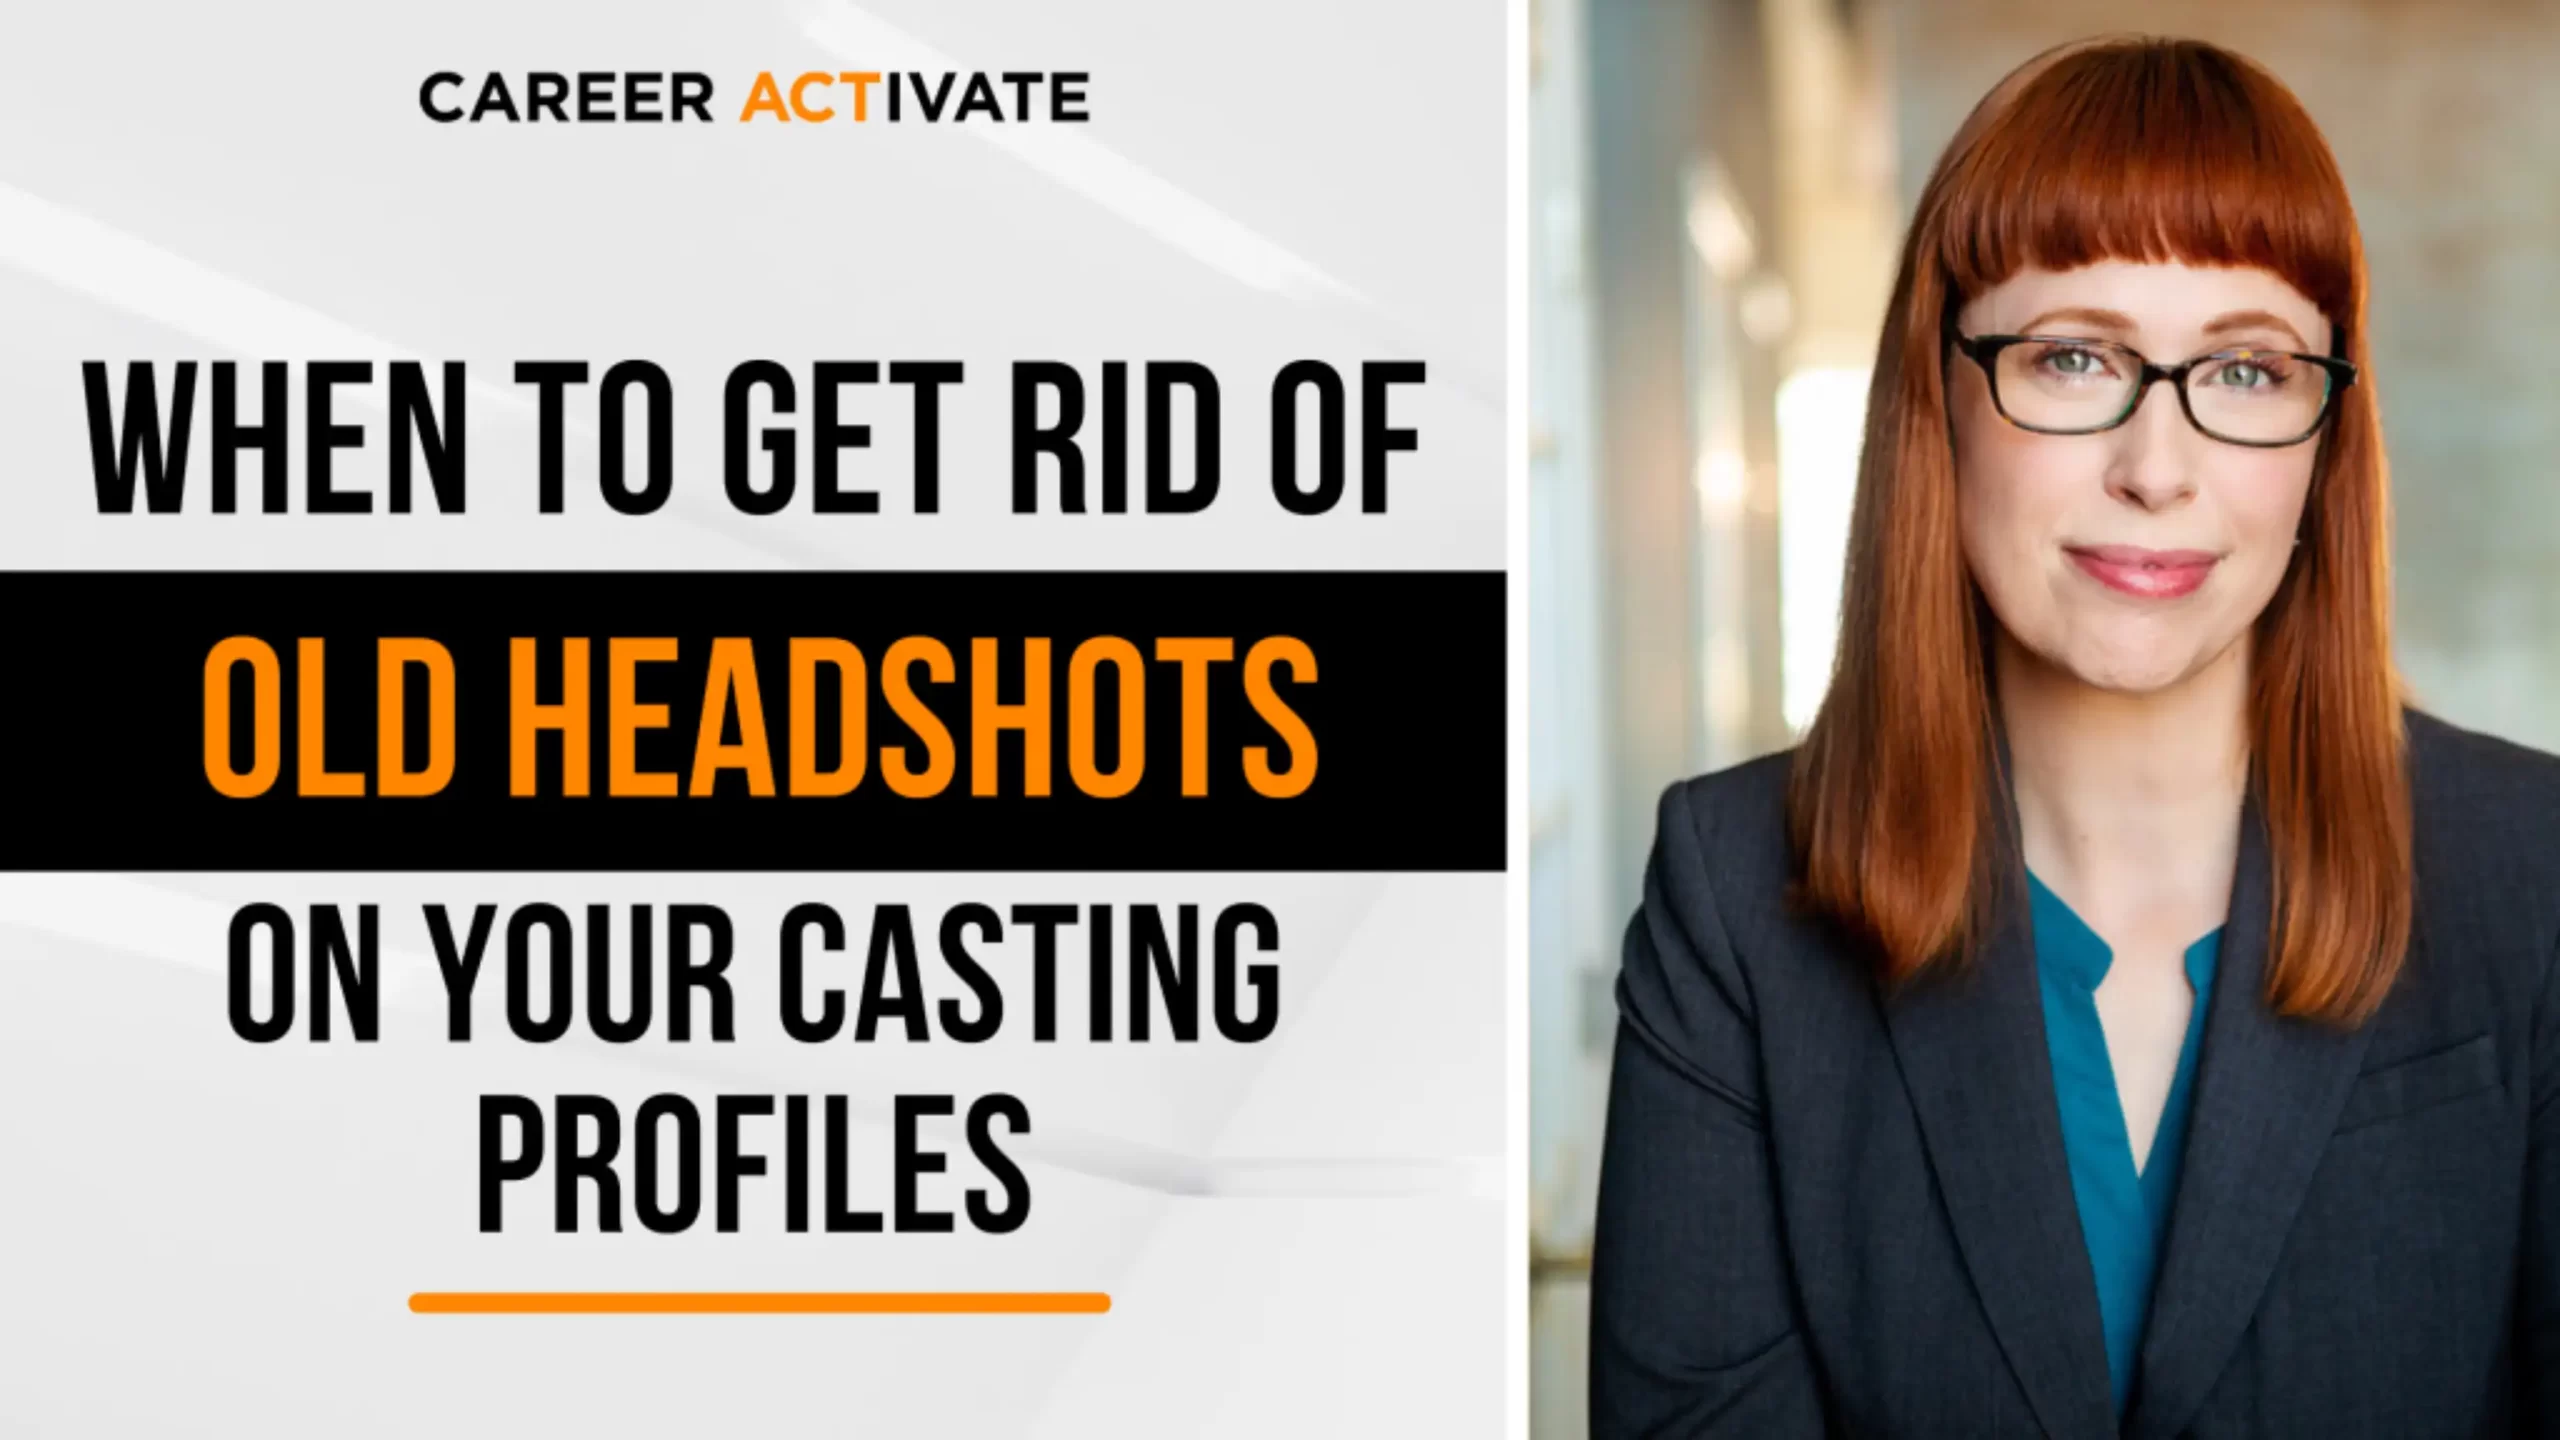 When To Get Rid of Old Headshots